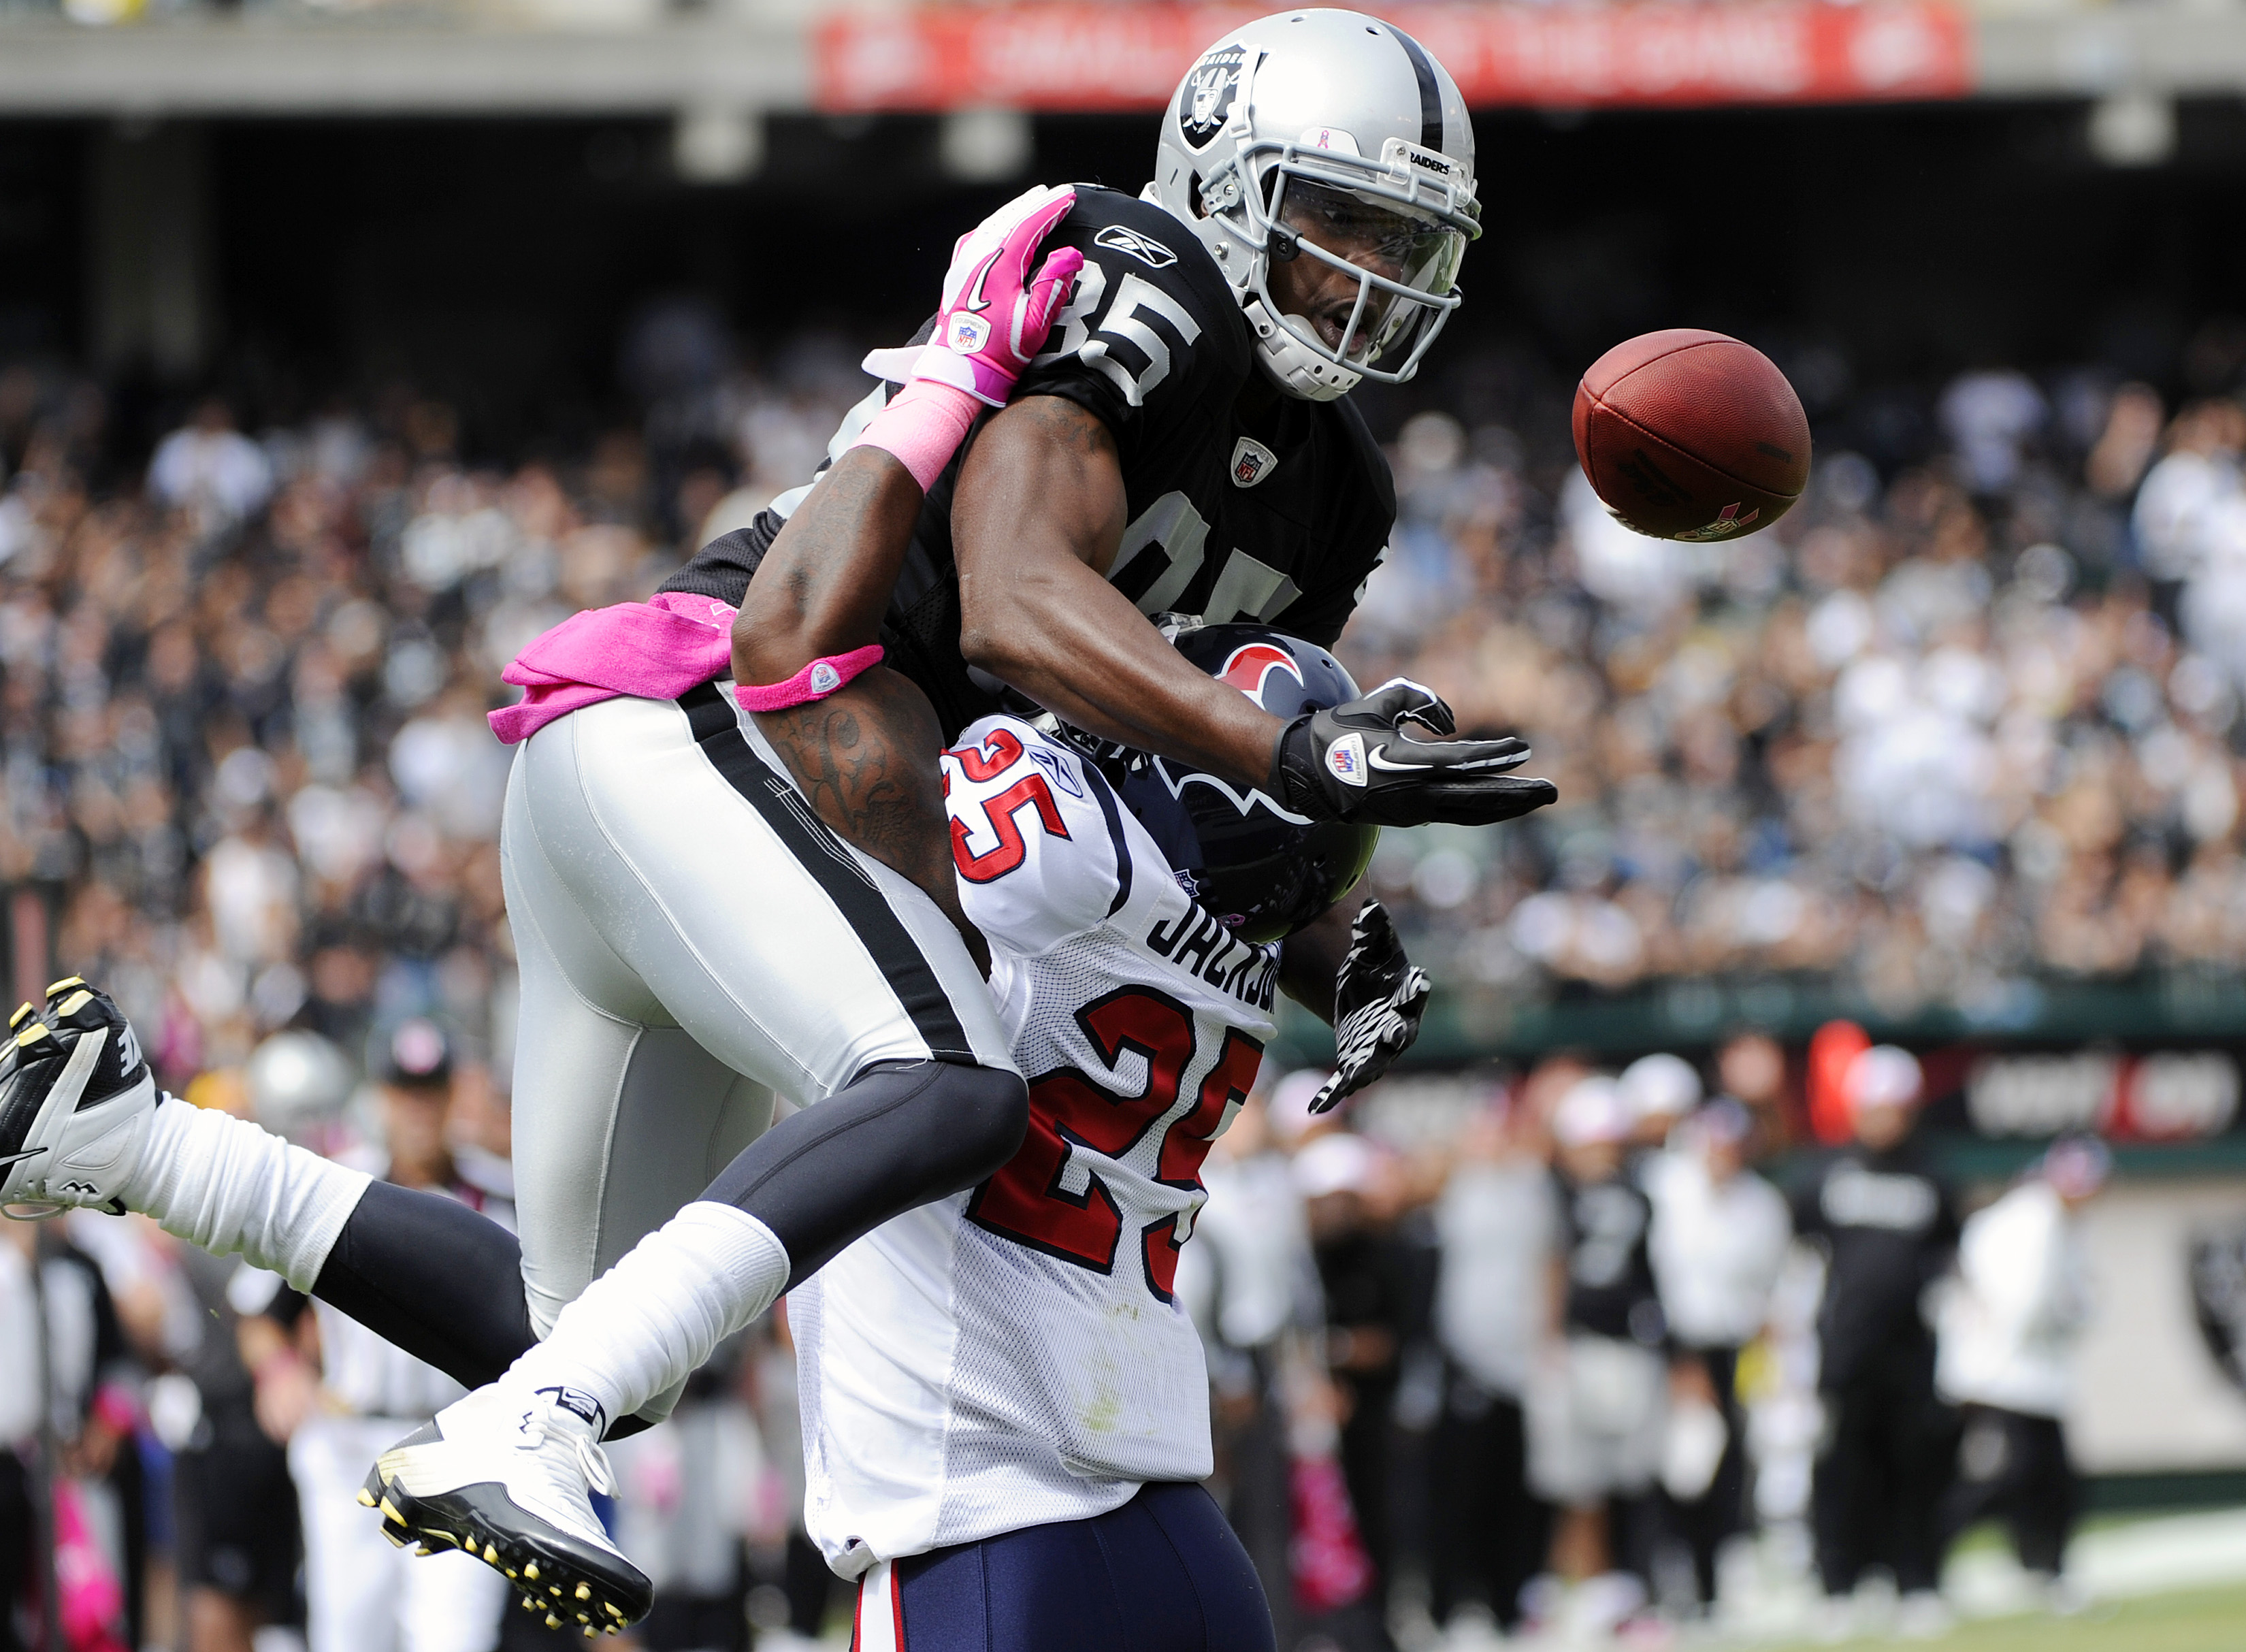 OAKLAND, CA - OCTOBER 3: Defensive Back Kareem Jackson #25 of the Houston Texans breaks up a pass in the endzone to wide receiver Darrius Heyward-Bey #85 of the Oakland Raiders during an NFL football game October 3, 2010 at The Oakland-Alameda County Coli